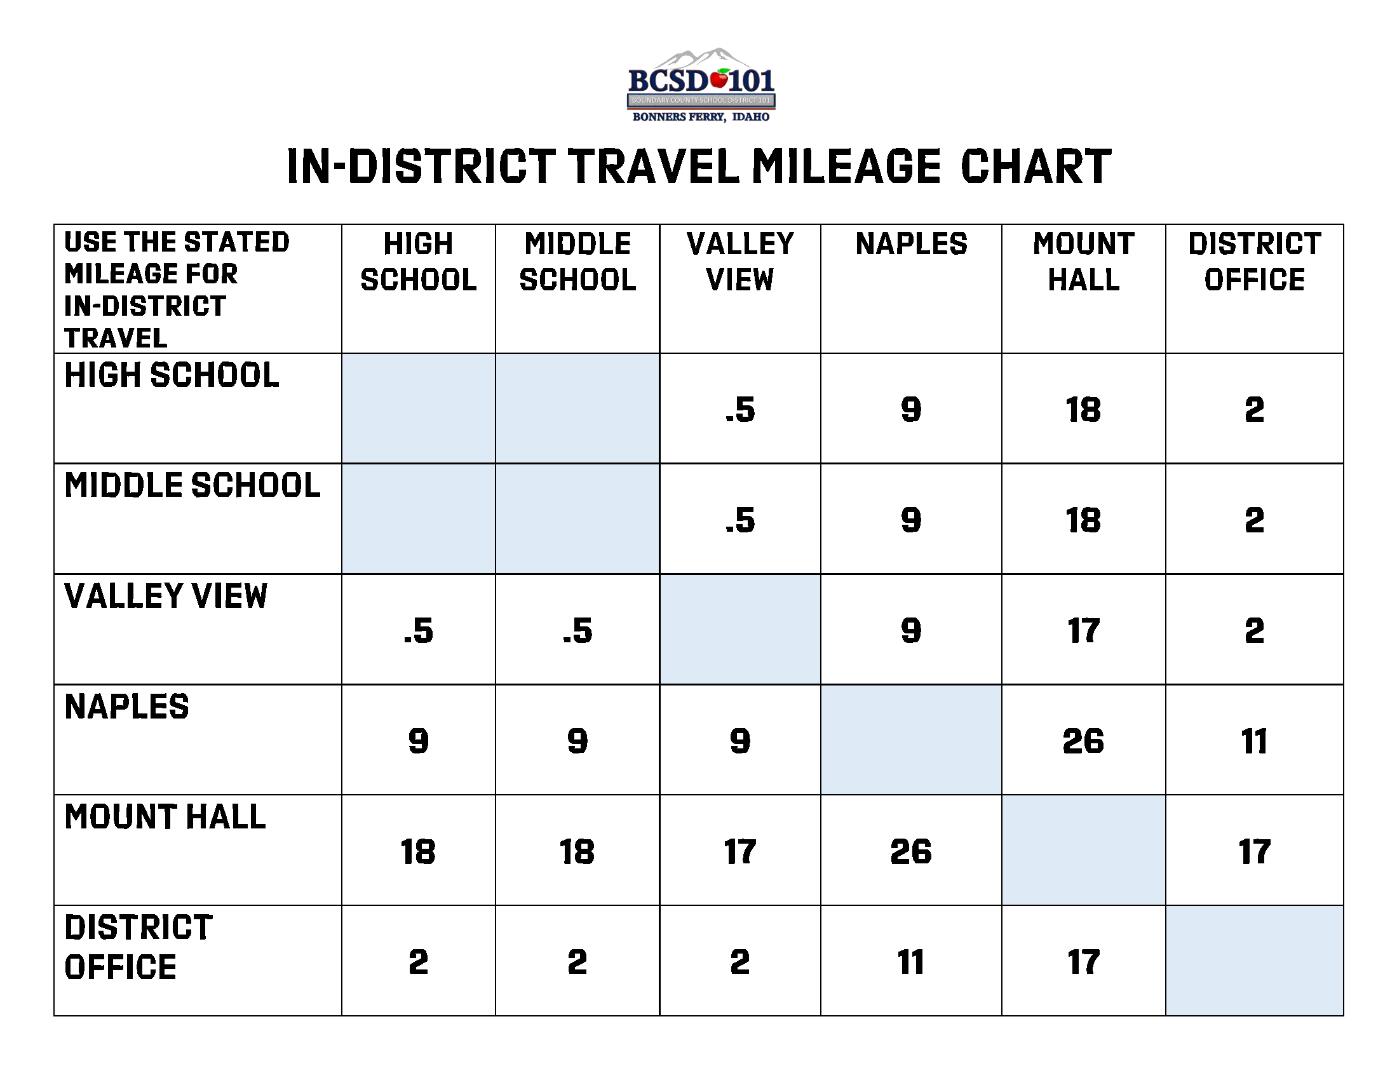 In District Mileage Chart